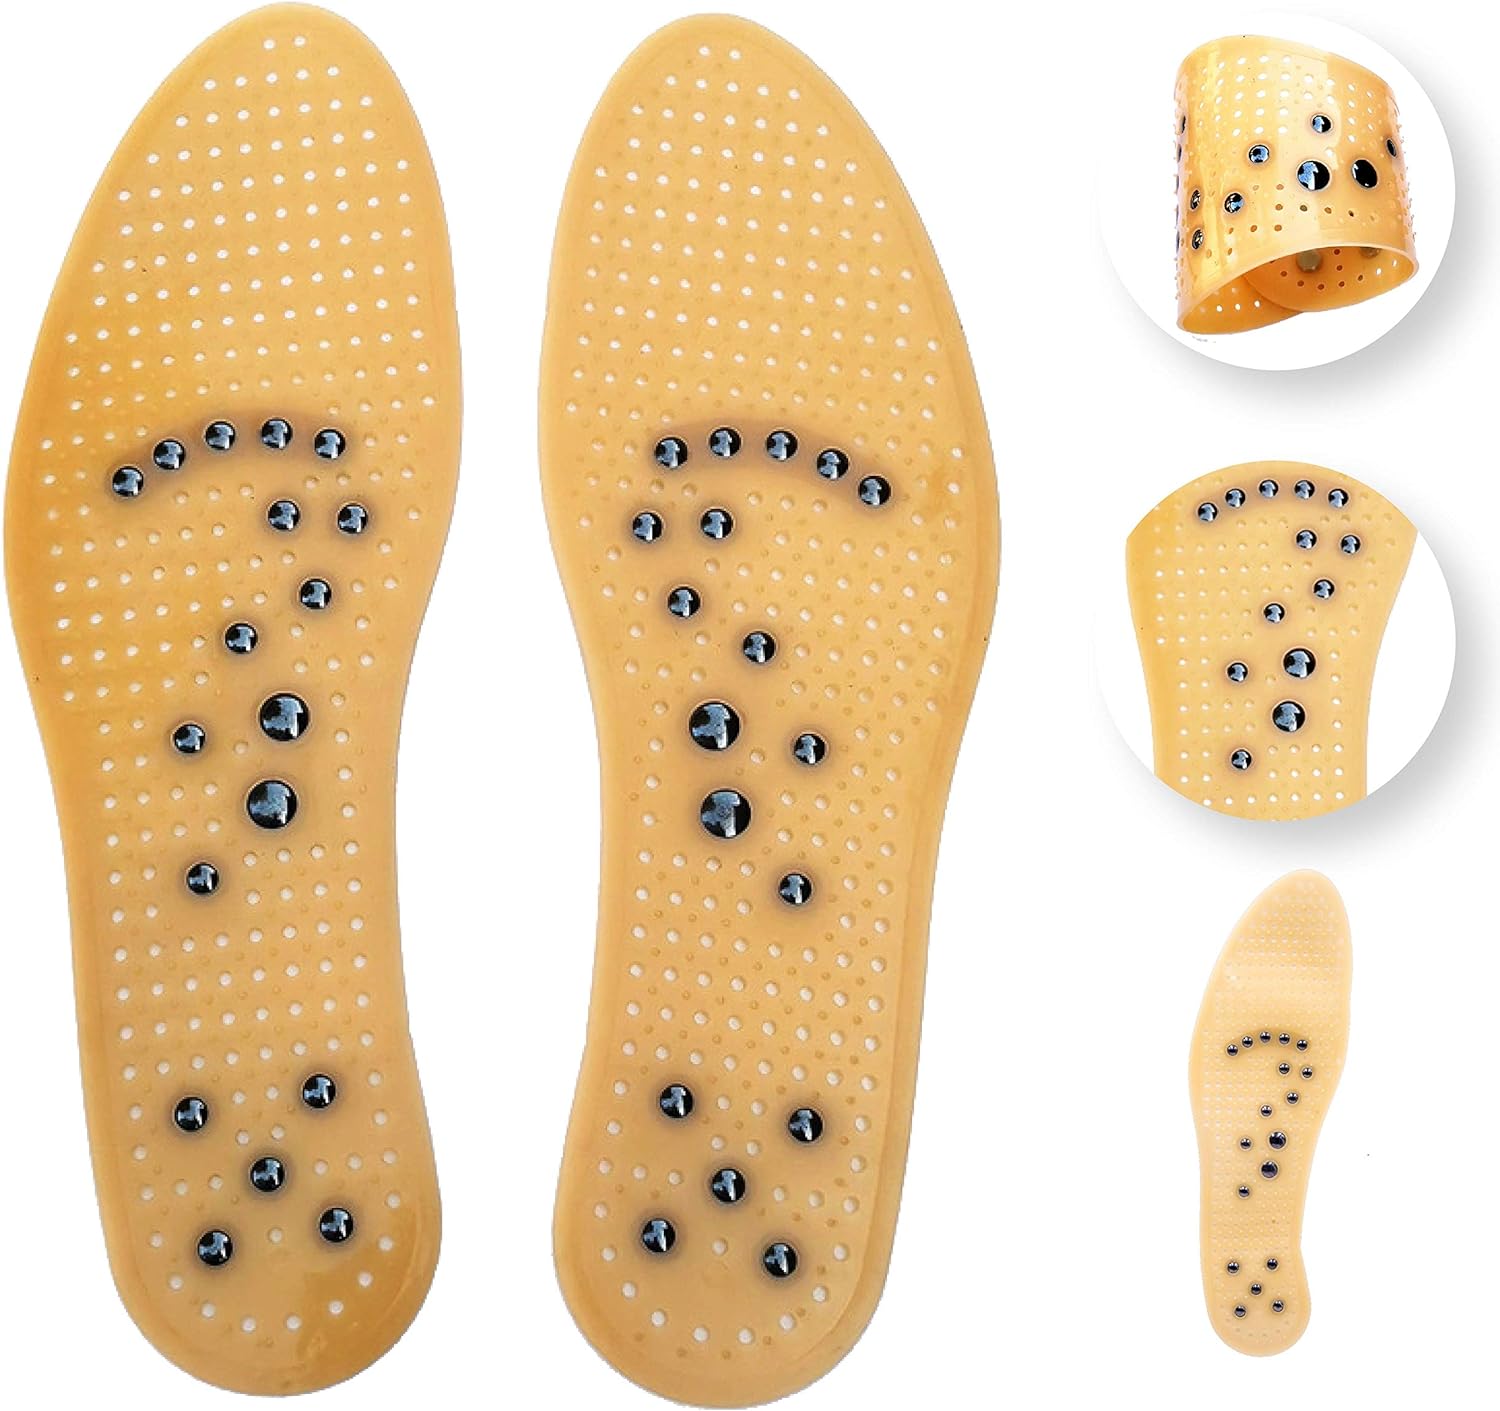 Carespot Gel Acupressure Magnetic Insoles/Inserts for Foot/Feet Therapy, Reflexology Shoe Massaging Insoles for Men  Women